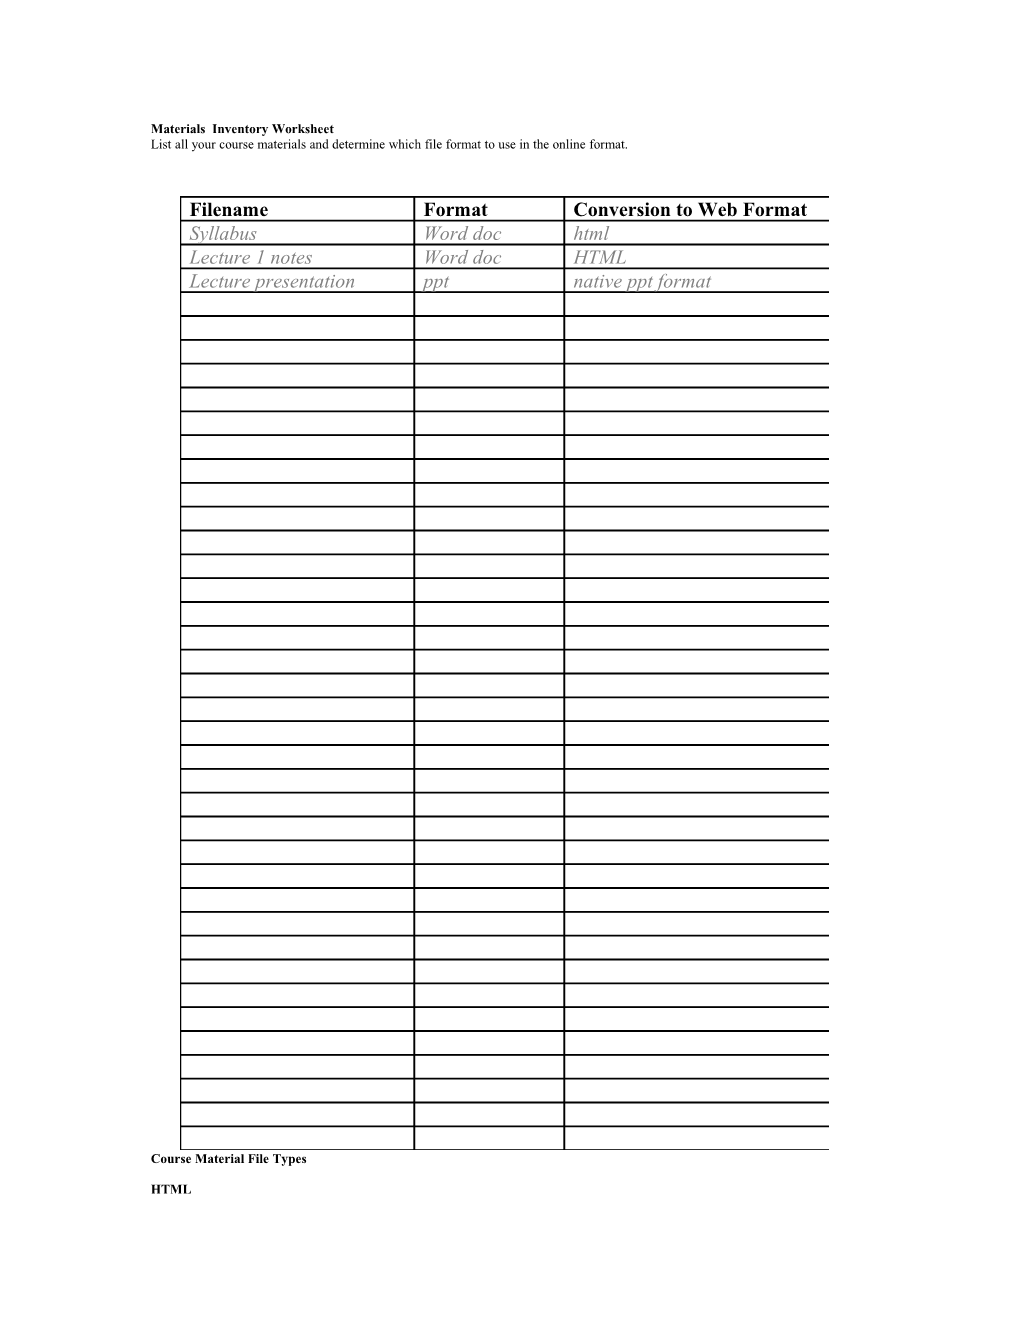 Course Content Inventory Worksheet